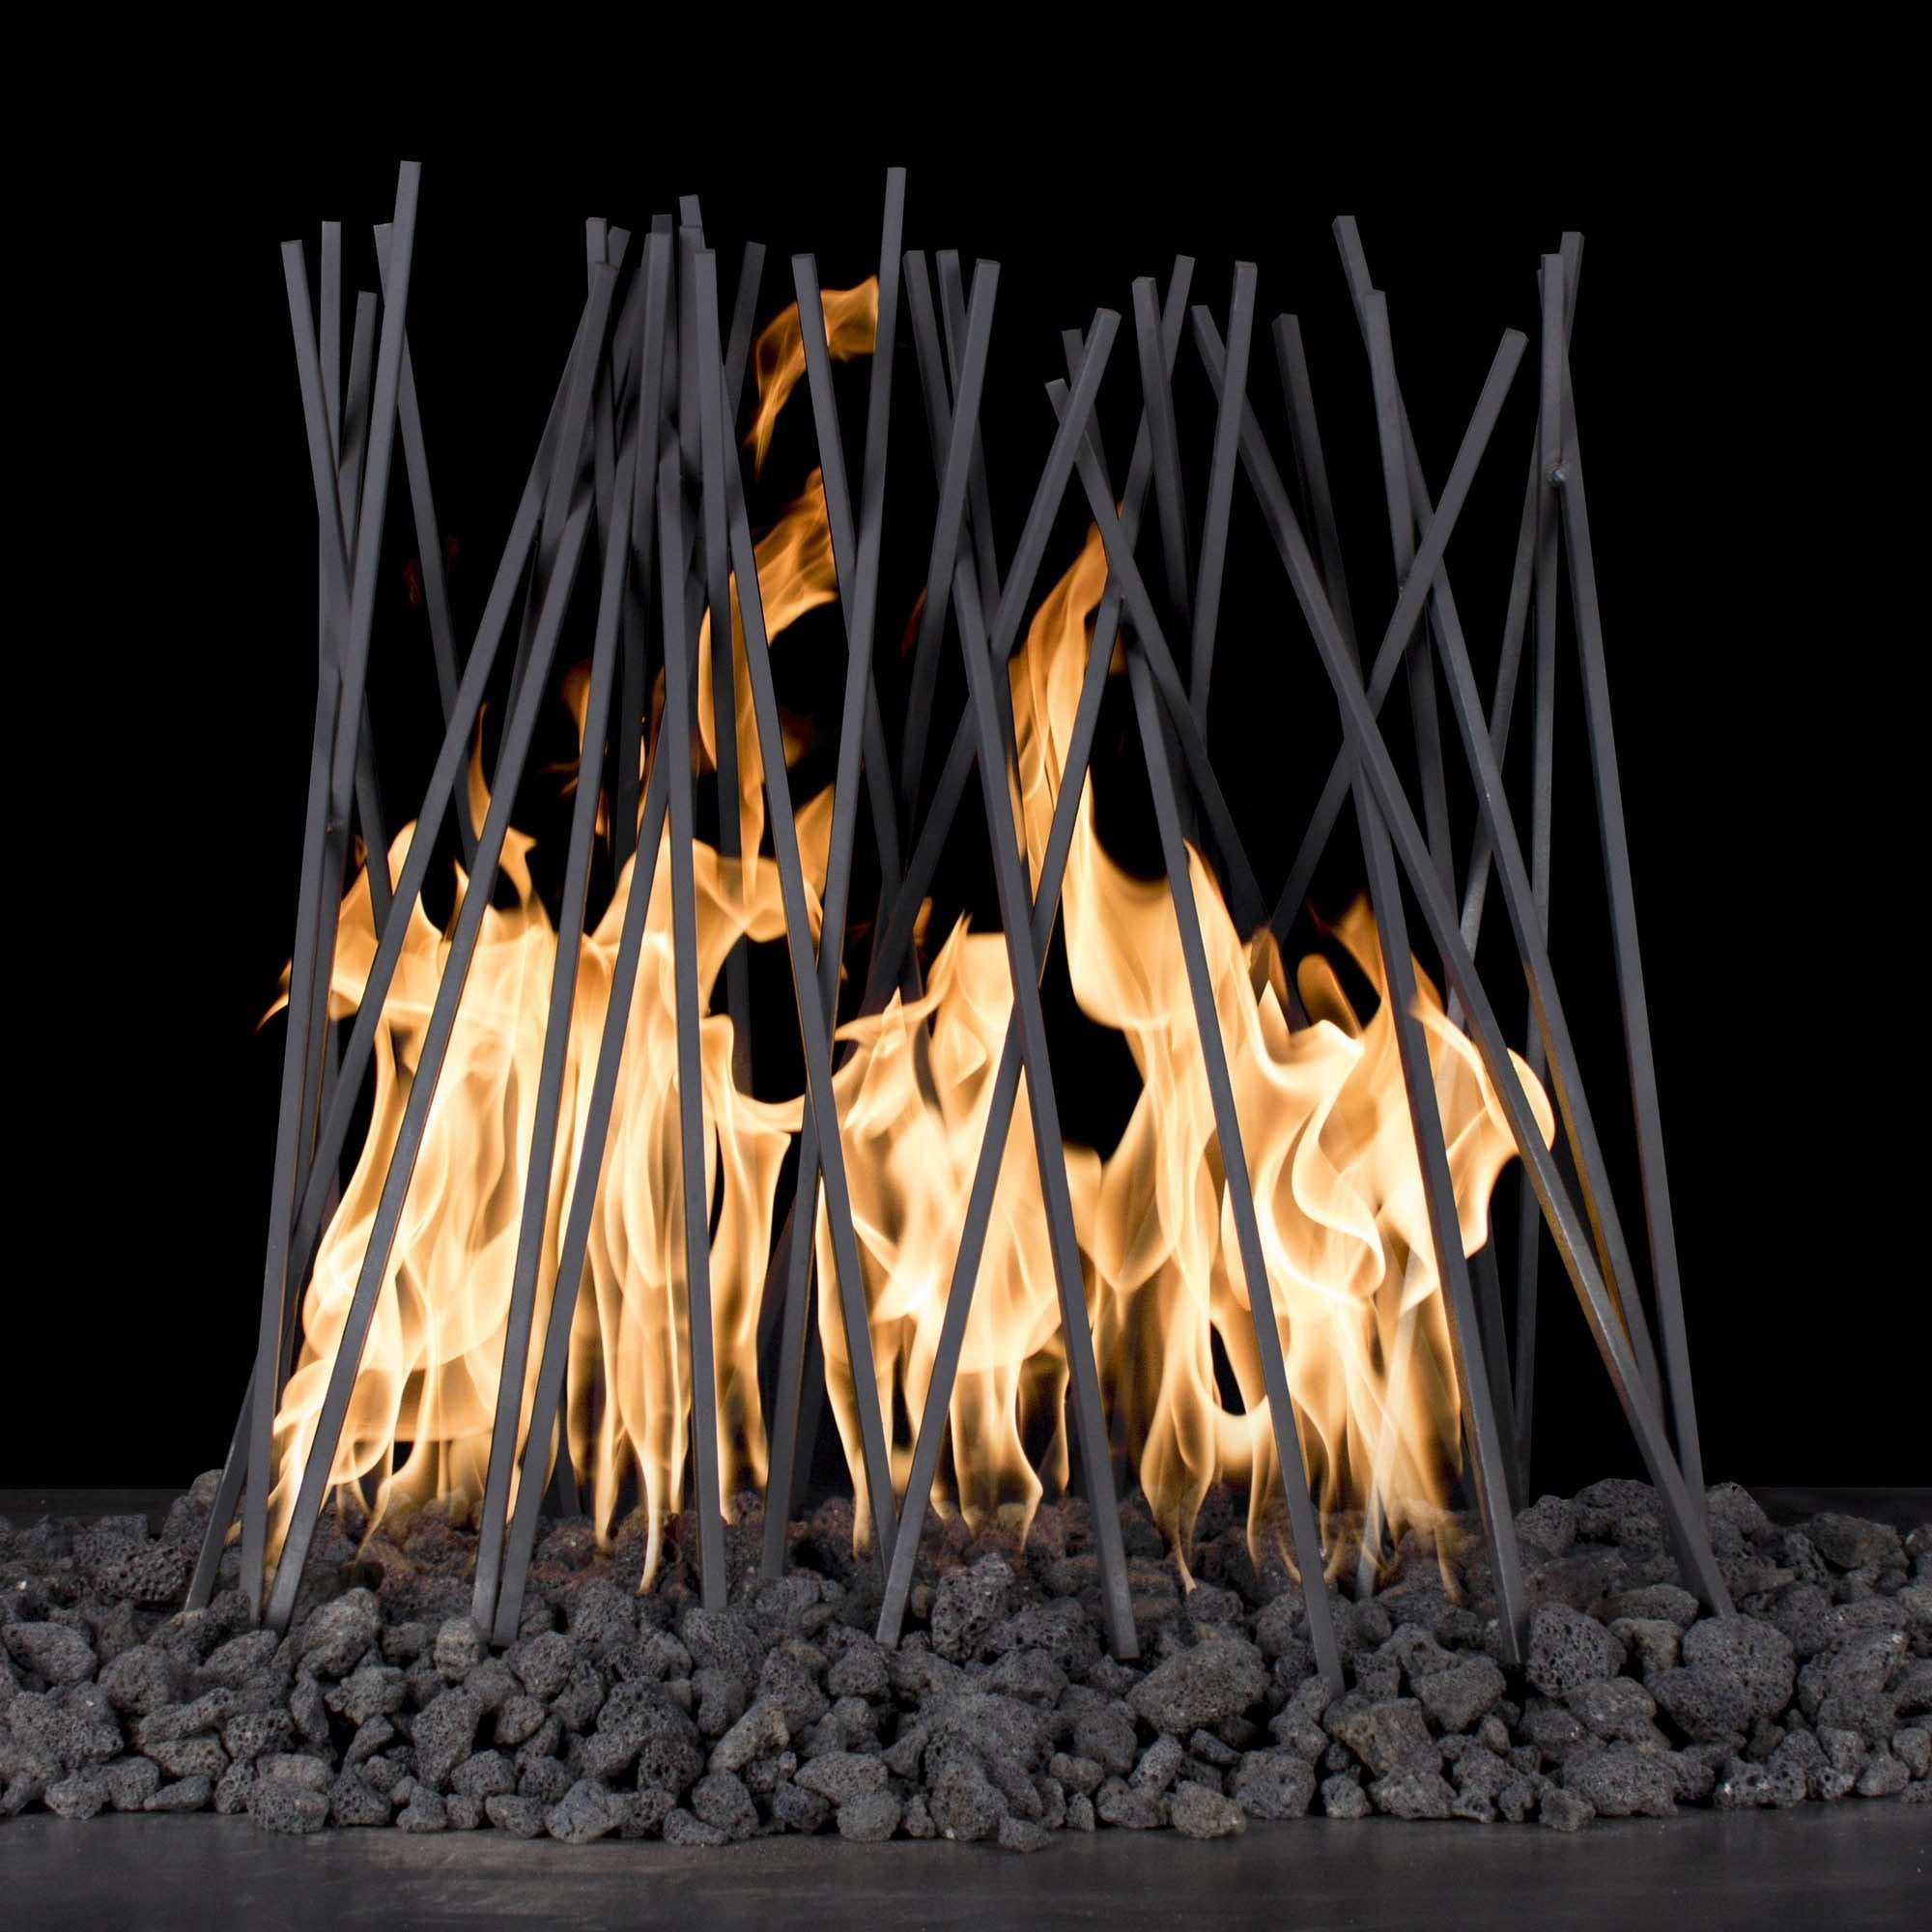 The Outdoor Plus 1/4" Milled Steel Fire Twigs Fire Pit Ornament